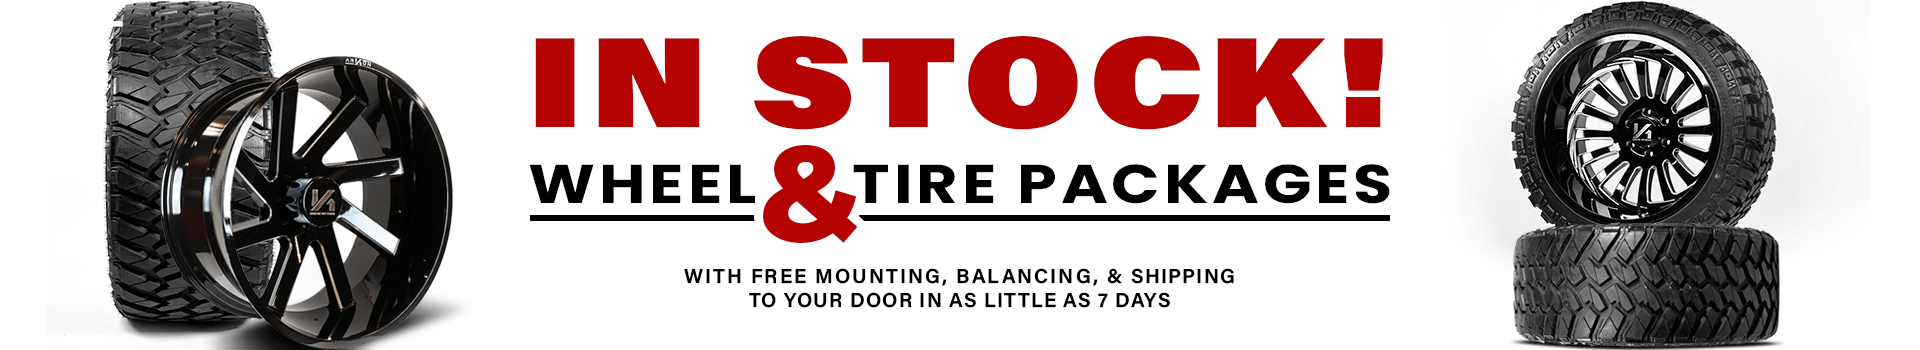 Truck wheel and tire packages online banner